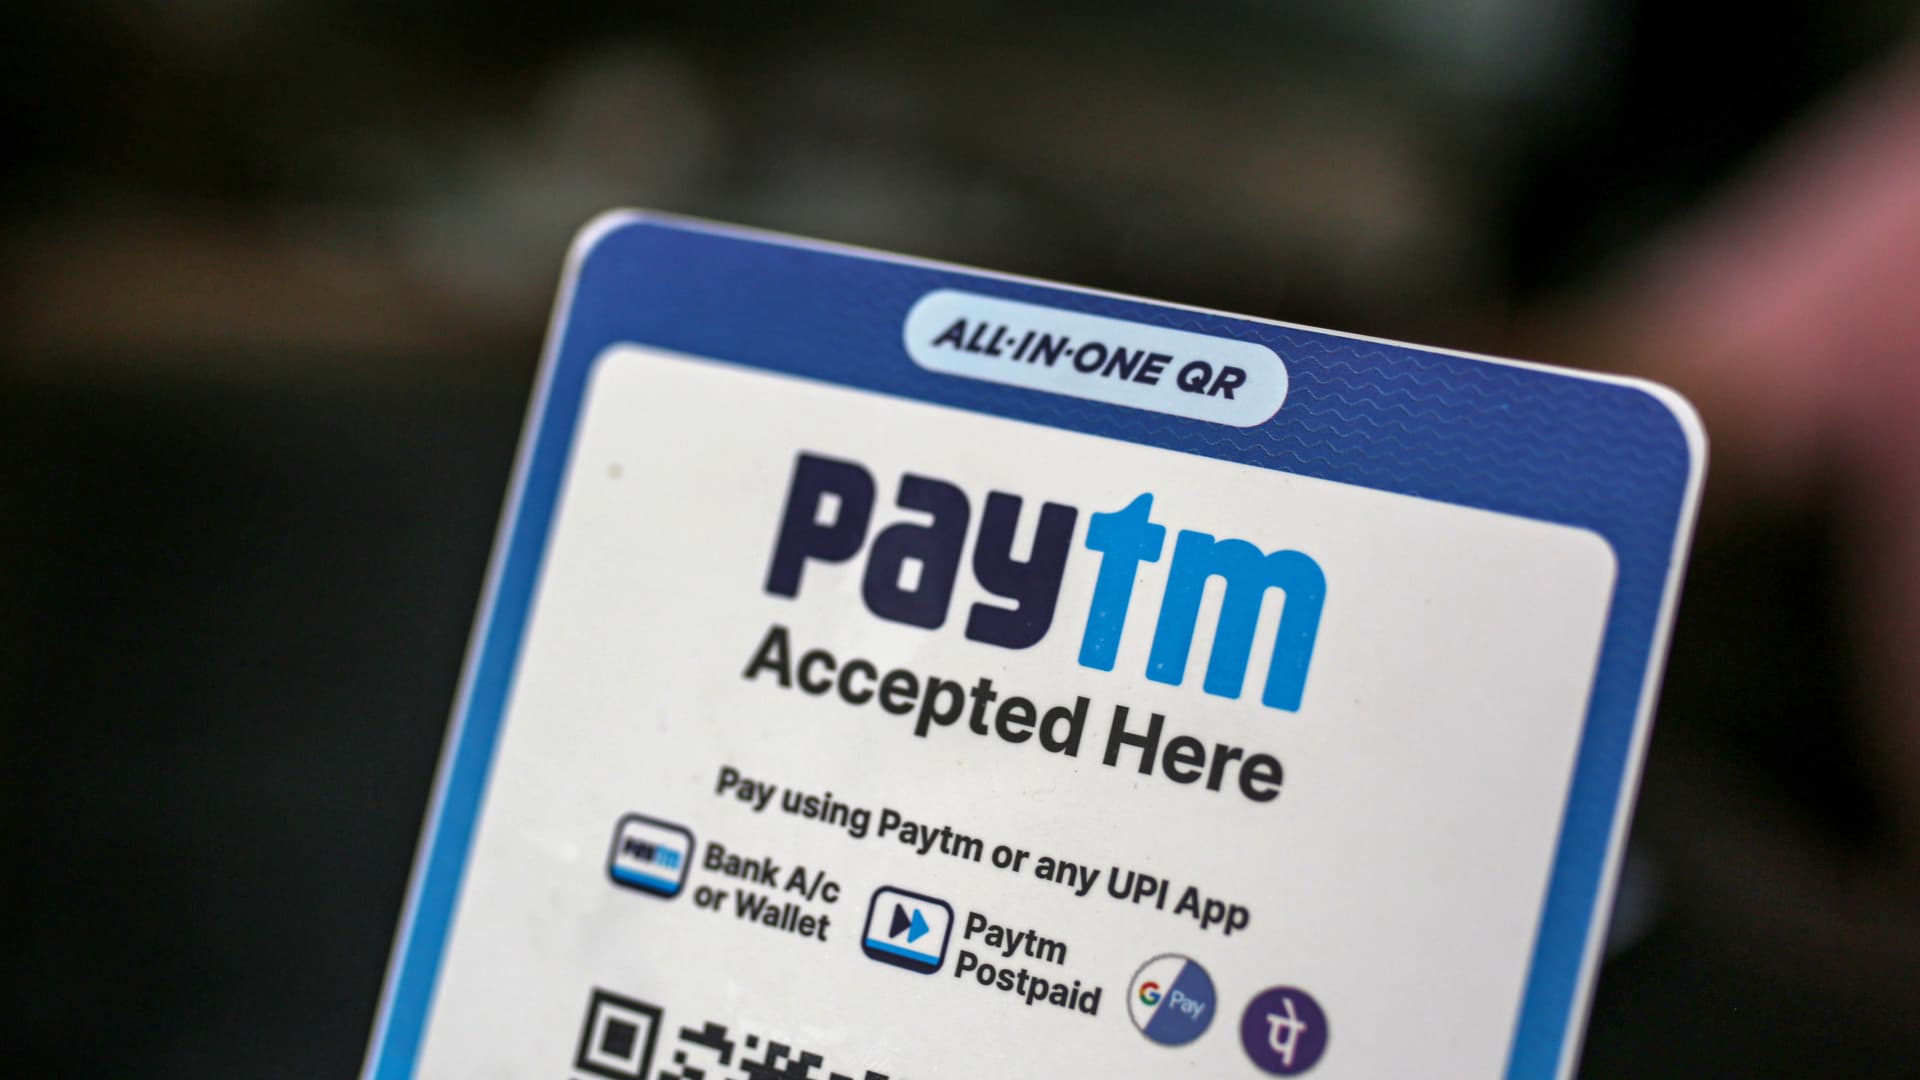 A restaurant advertises the use of the Paytm digital payment system in Mumbai, India, on Saturday, July 17, 2021.